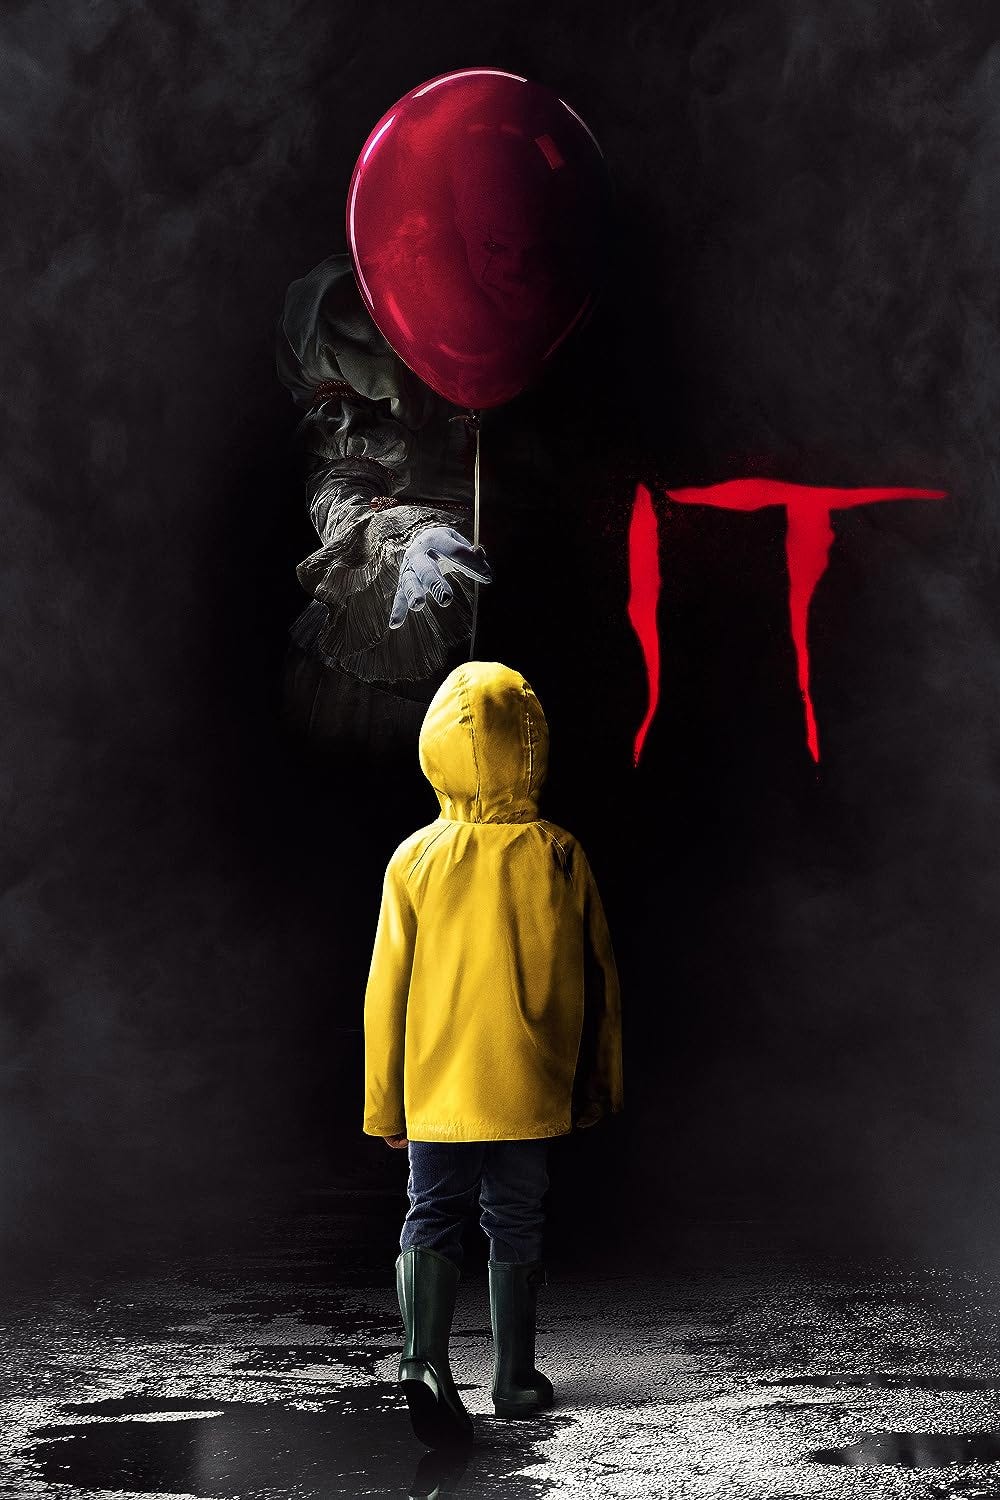 IT poster from IMDb